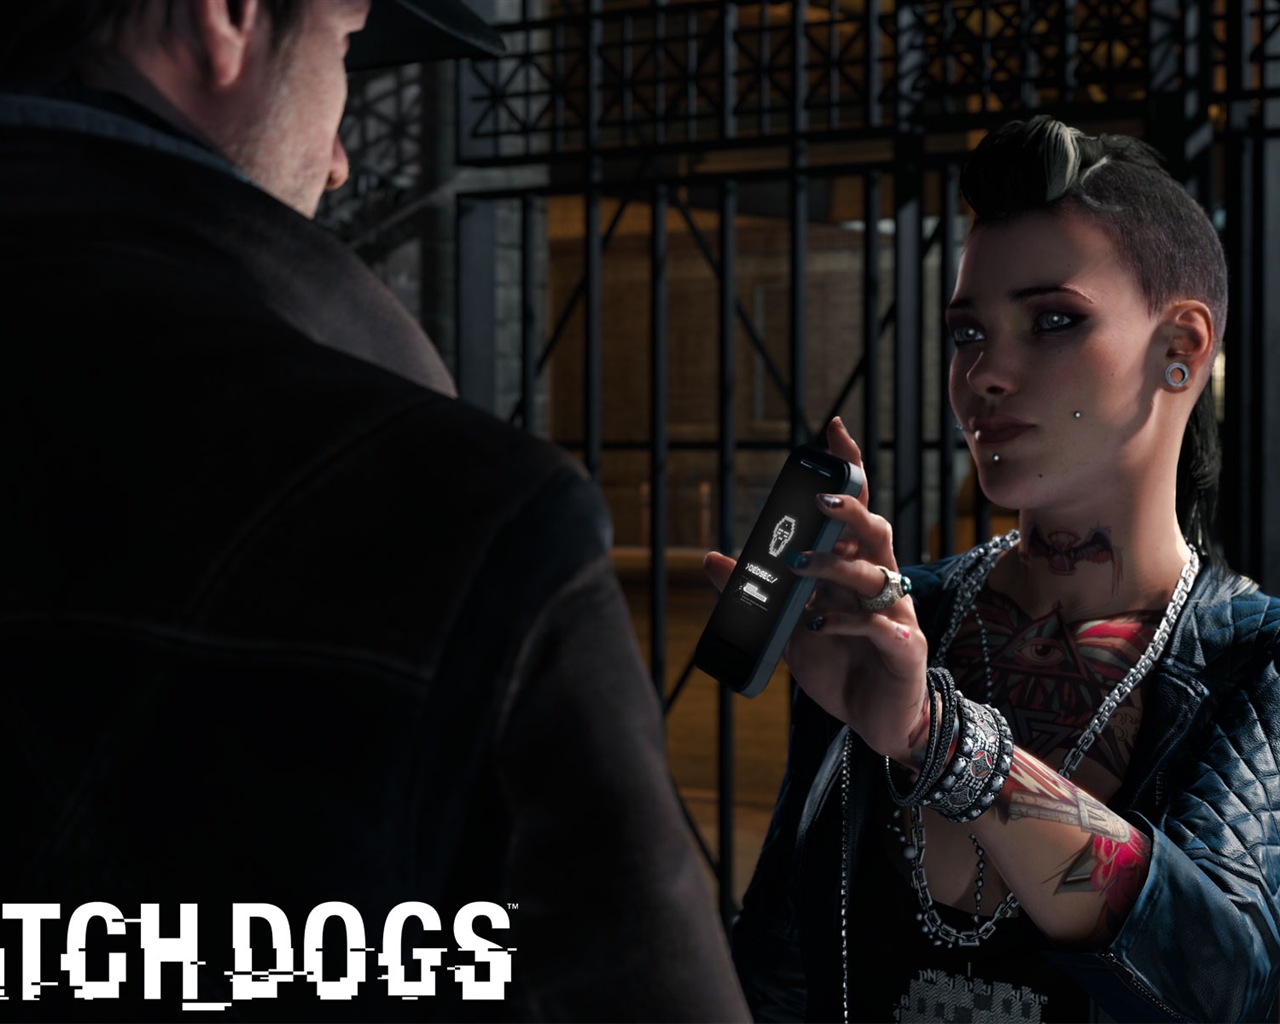 Watch Dogs 2013 juegos HD wallpapers #3 - 1280x1024